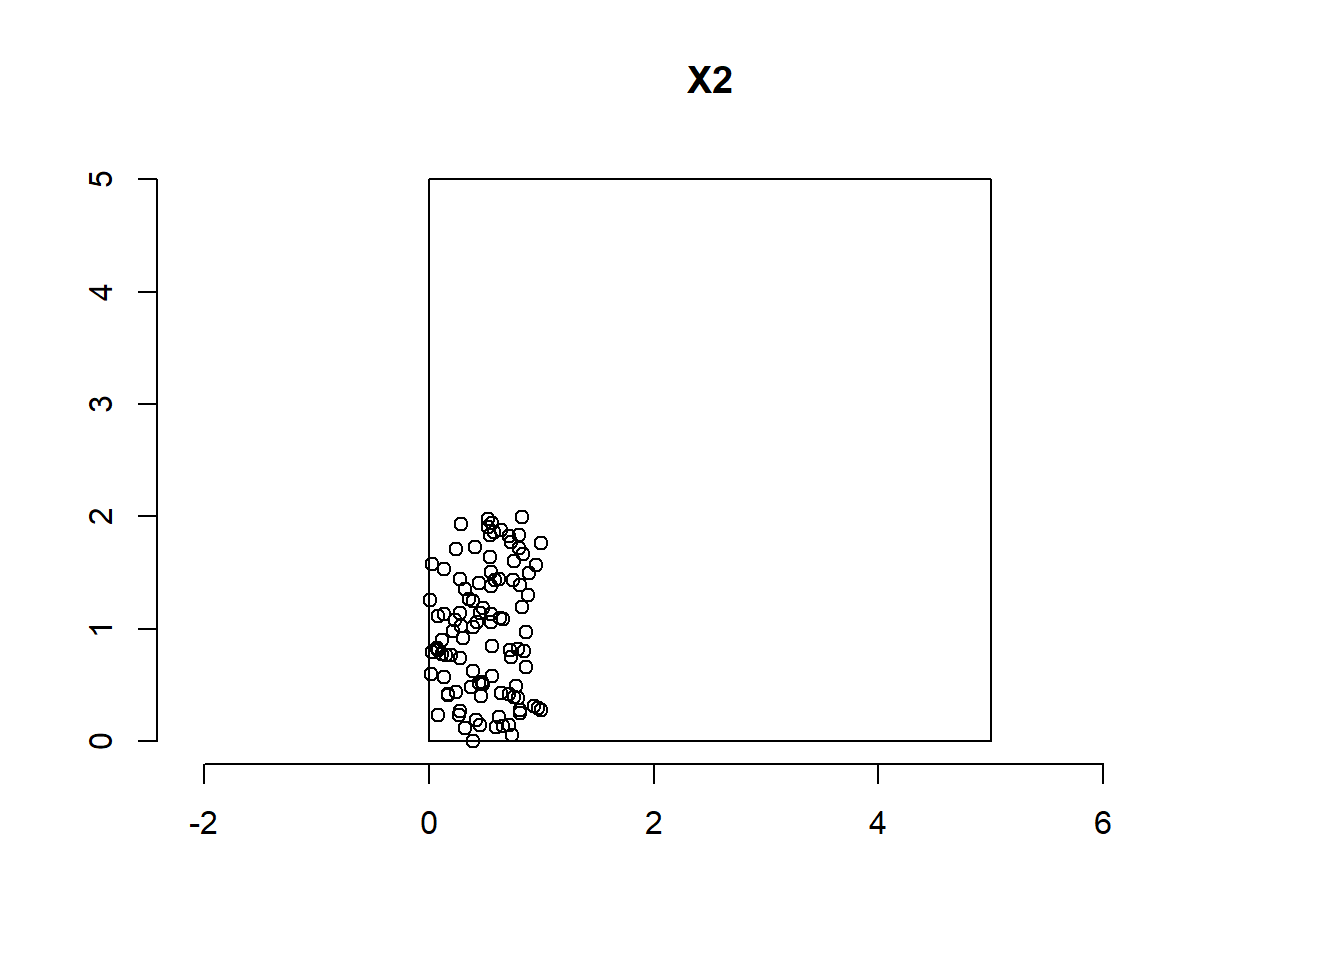 Point pattern of 100 independent uniform random points generated in $[0, 1] \times [0, 2]$ plotted in $[0, 5] \times [0, 5]$.